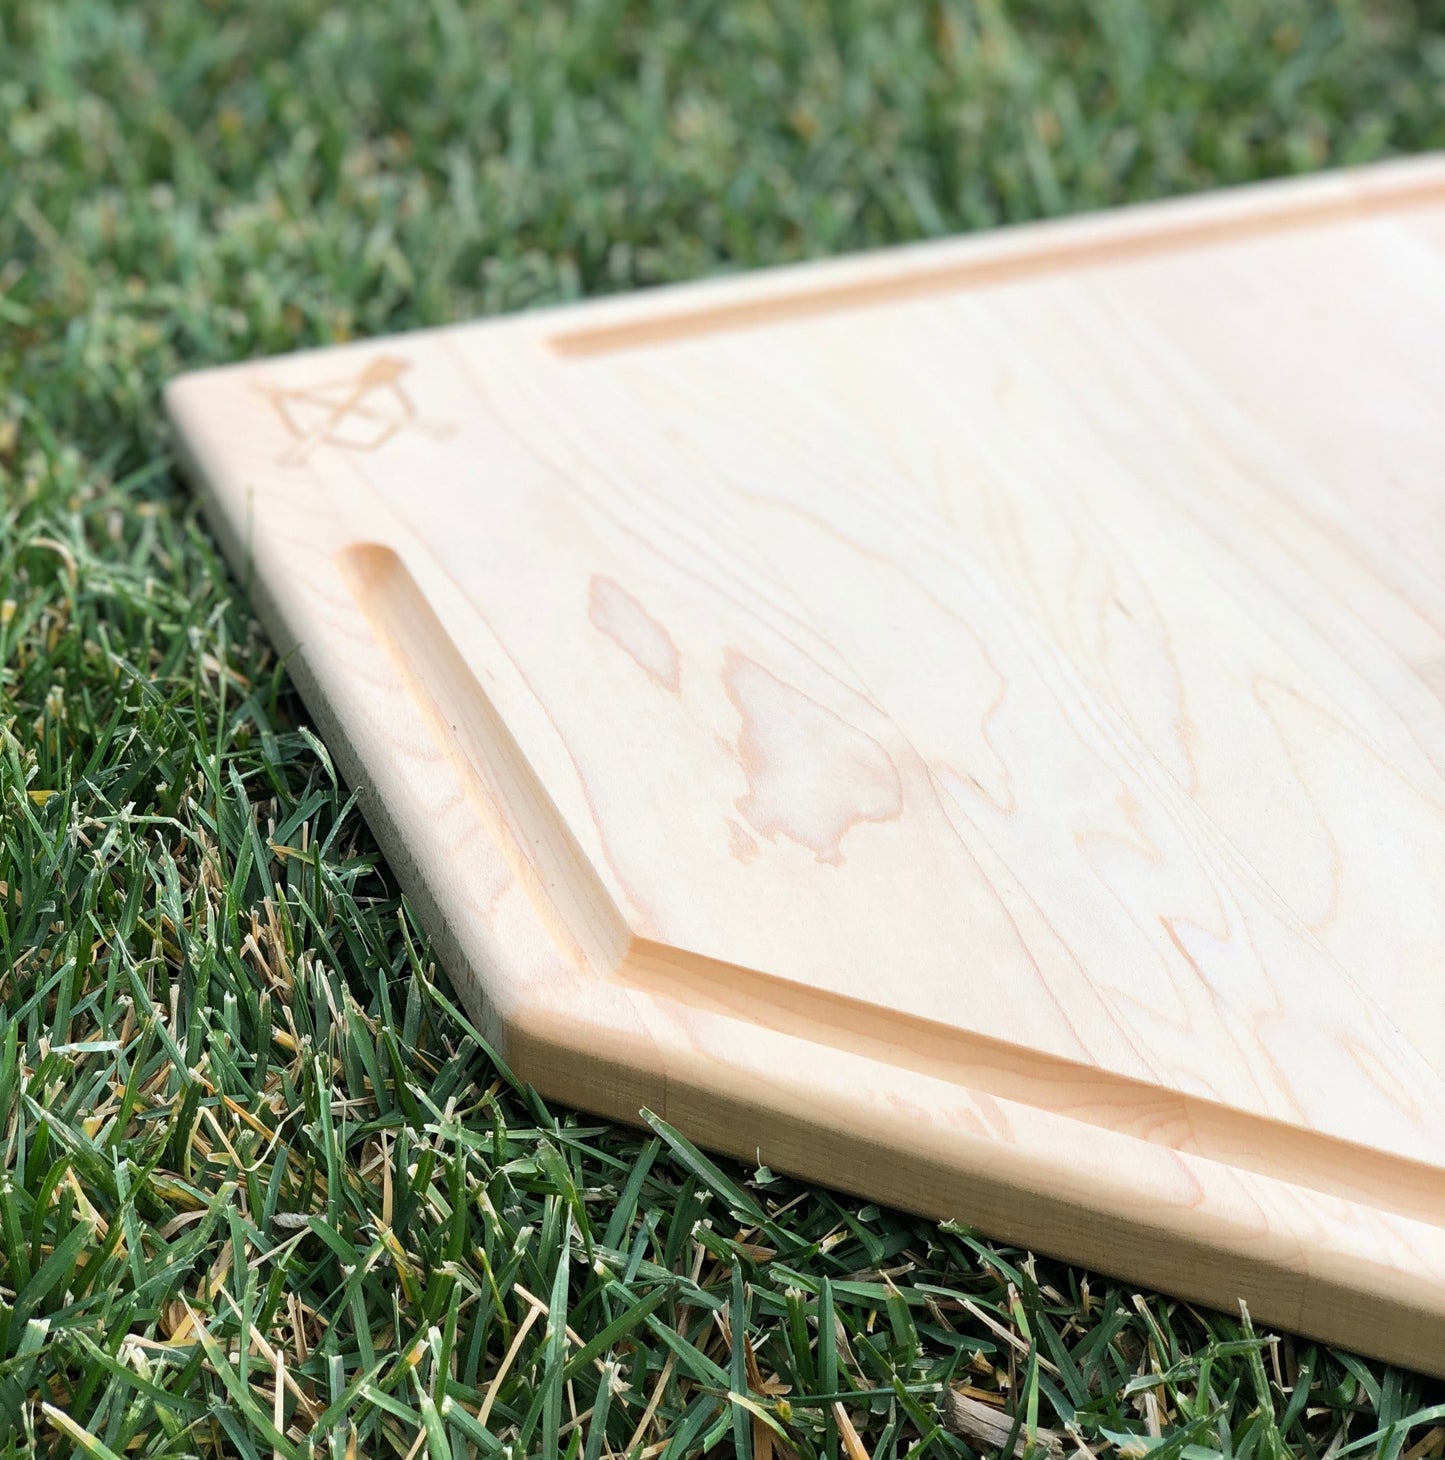 Full Size (17" x 17") Home Plate Cutting Board With Trough - The Tool Store